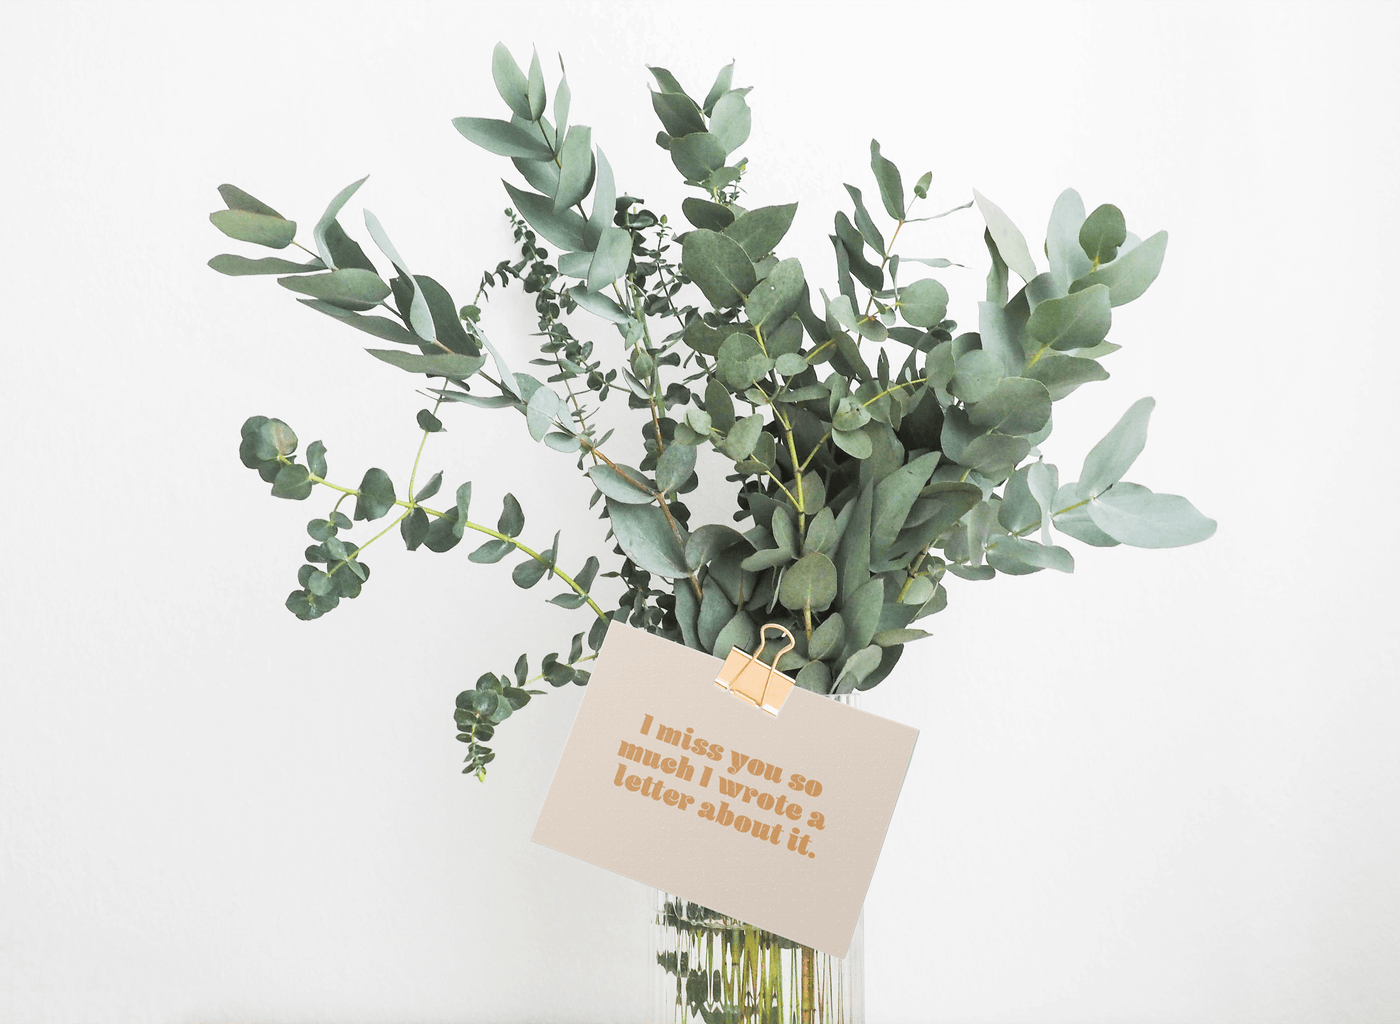 a plant with a card attached to it that is beige horizontal card that reads "I miss you so much I wrote a letter about it". in a yellow brownish text